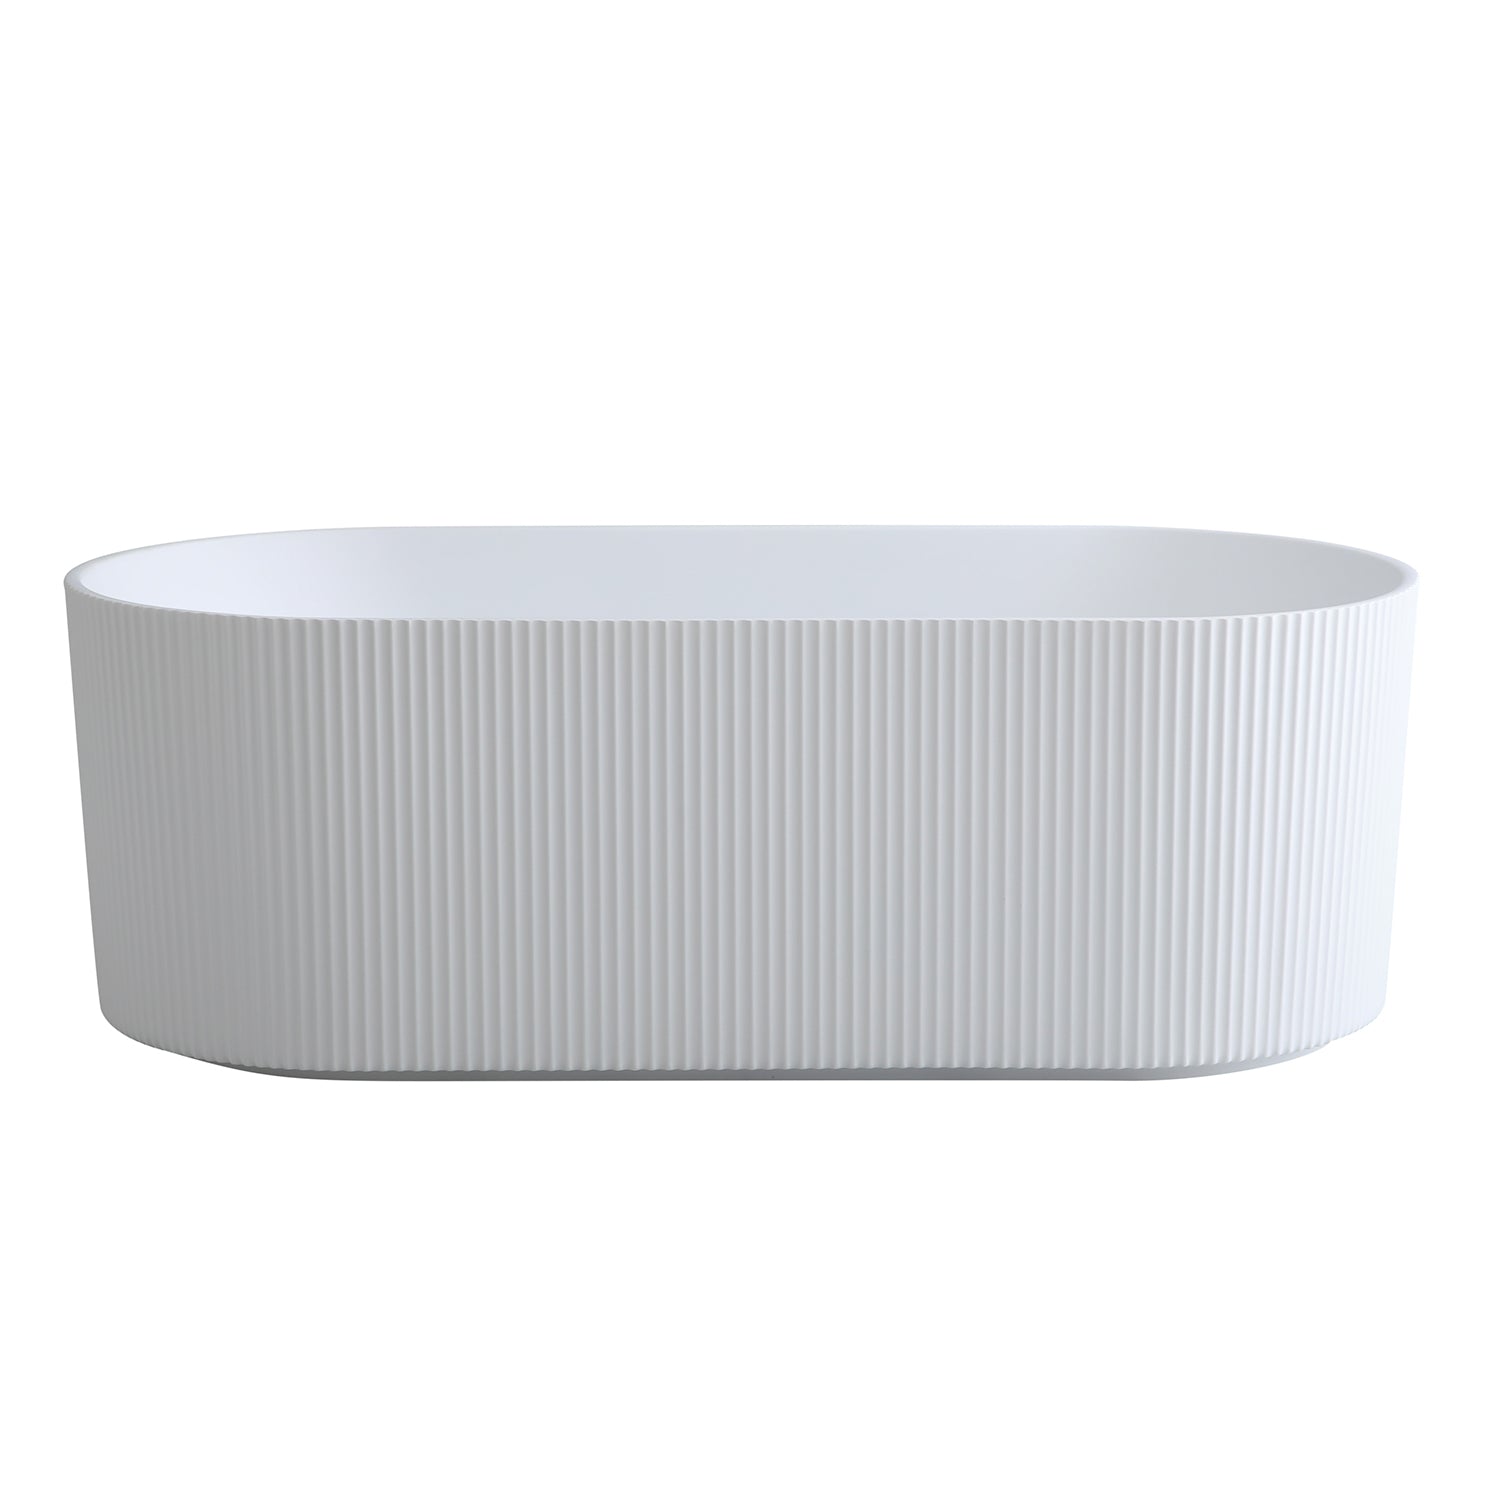 CETO ALLY GROOVE OVAL FREESTANDING BATH MATTE WHITE (AVAILABLE IN 1500MM AND 1700MM)